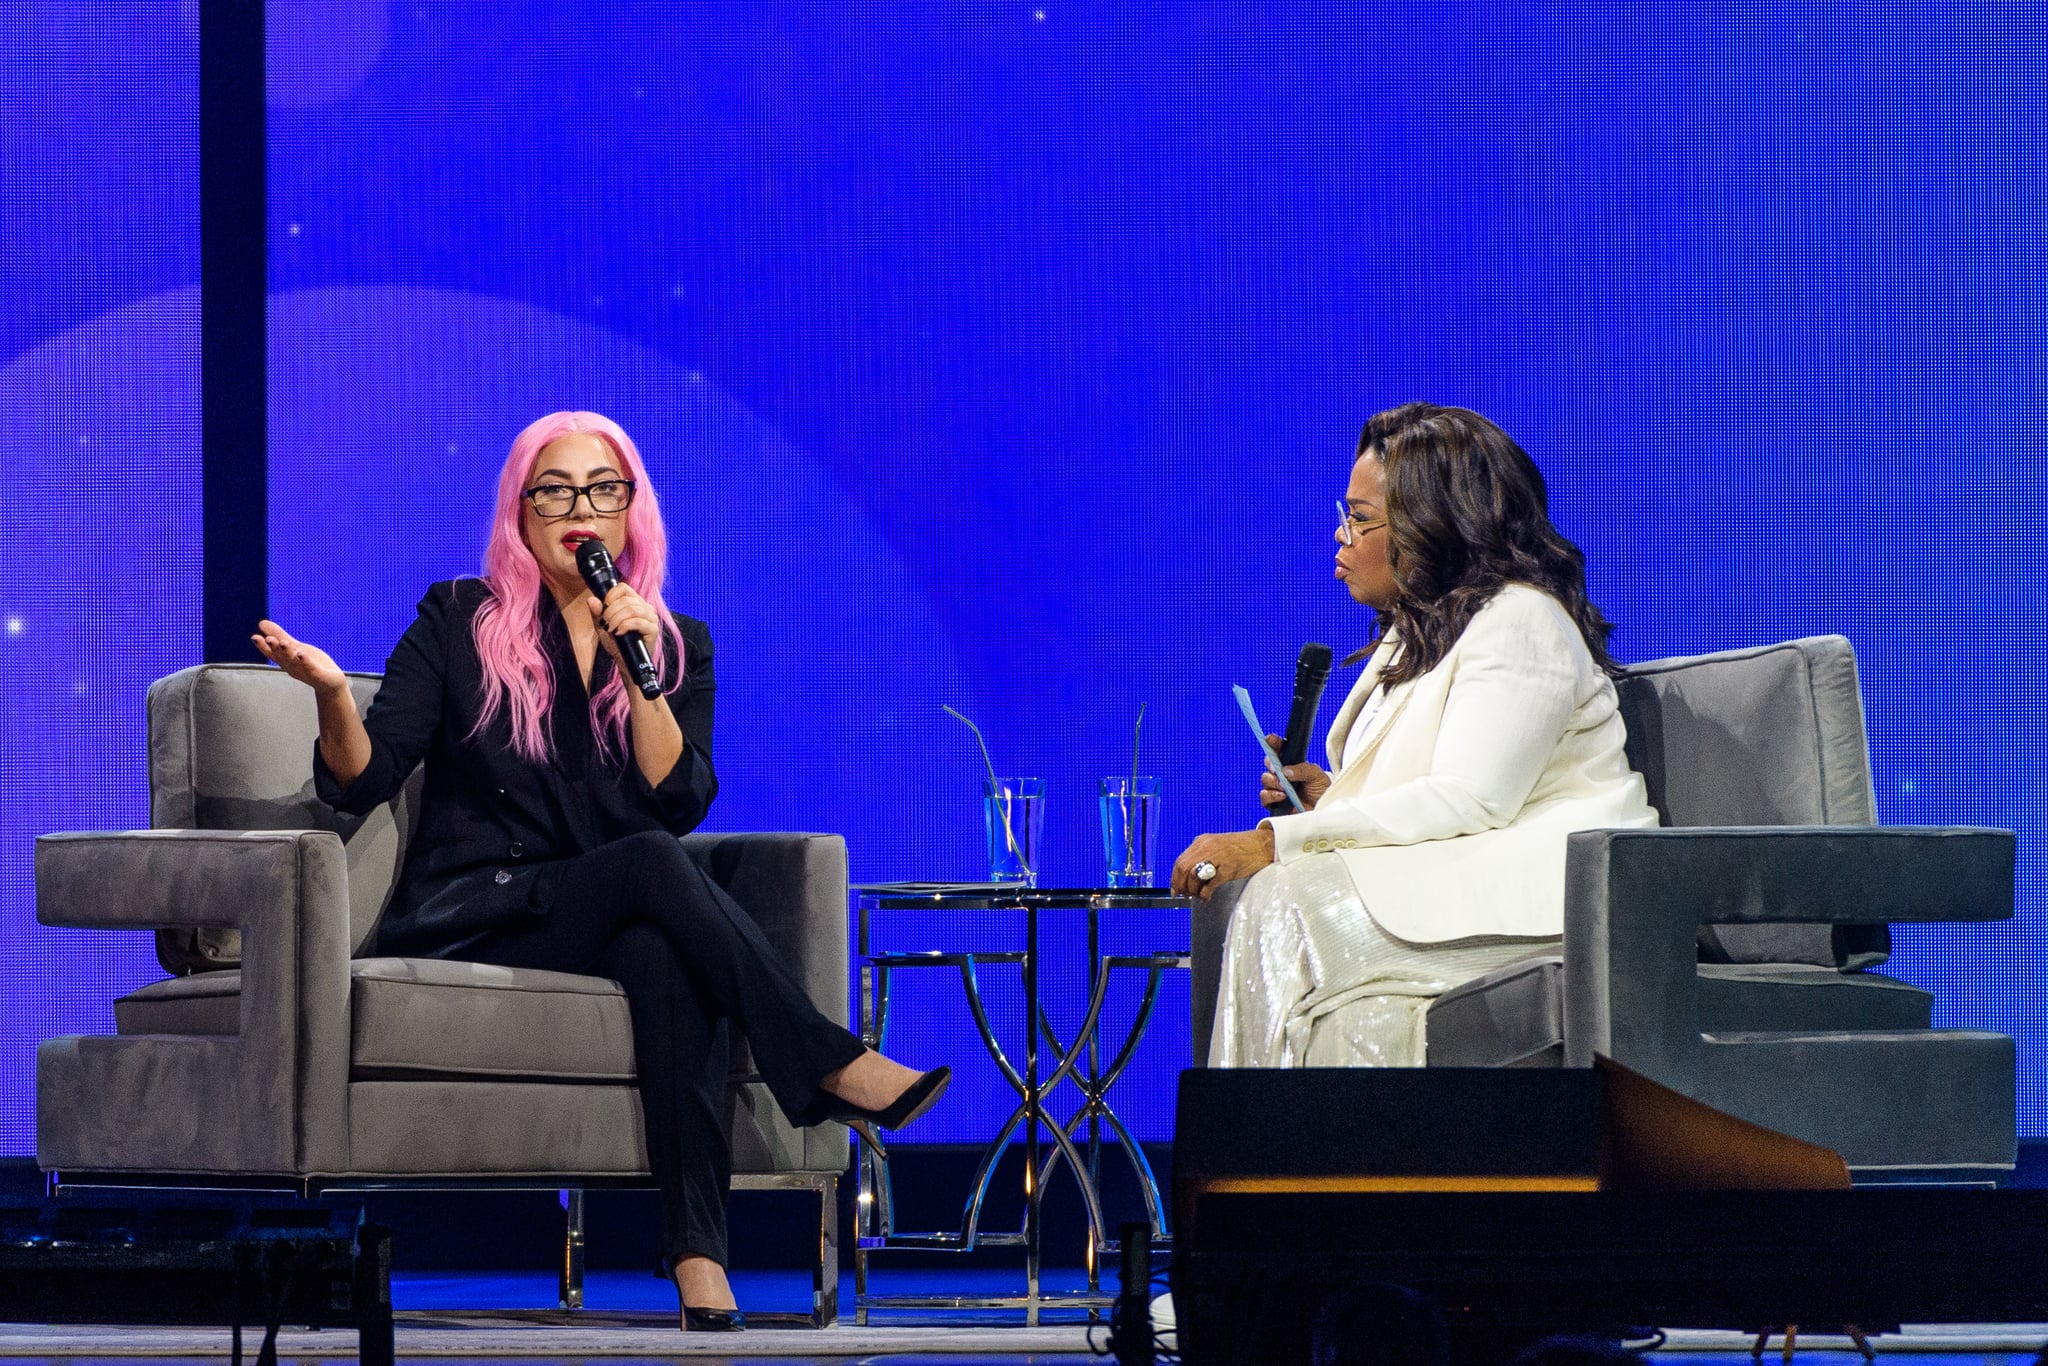 SUNRISE, FL - JANUARY 04: (EXCLUSIVE COVERAGE) Lady Gaga and Oprah Winfrey speak during the WW (Weight Watchers Reimagined) & Oprah's 2020 Vision: Your Life In Focus Tour at BB&T Centre on January 4, 2020 in Sunrise, Florida.  (Photo by Jason Koerner/Getty Images for Oprah)